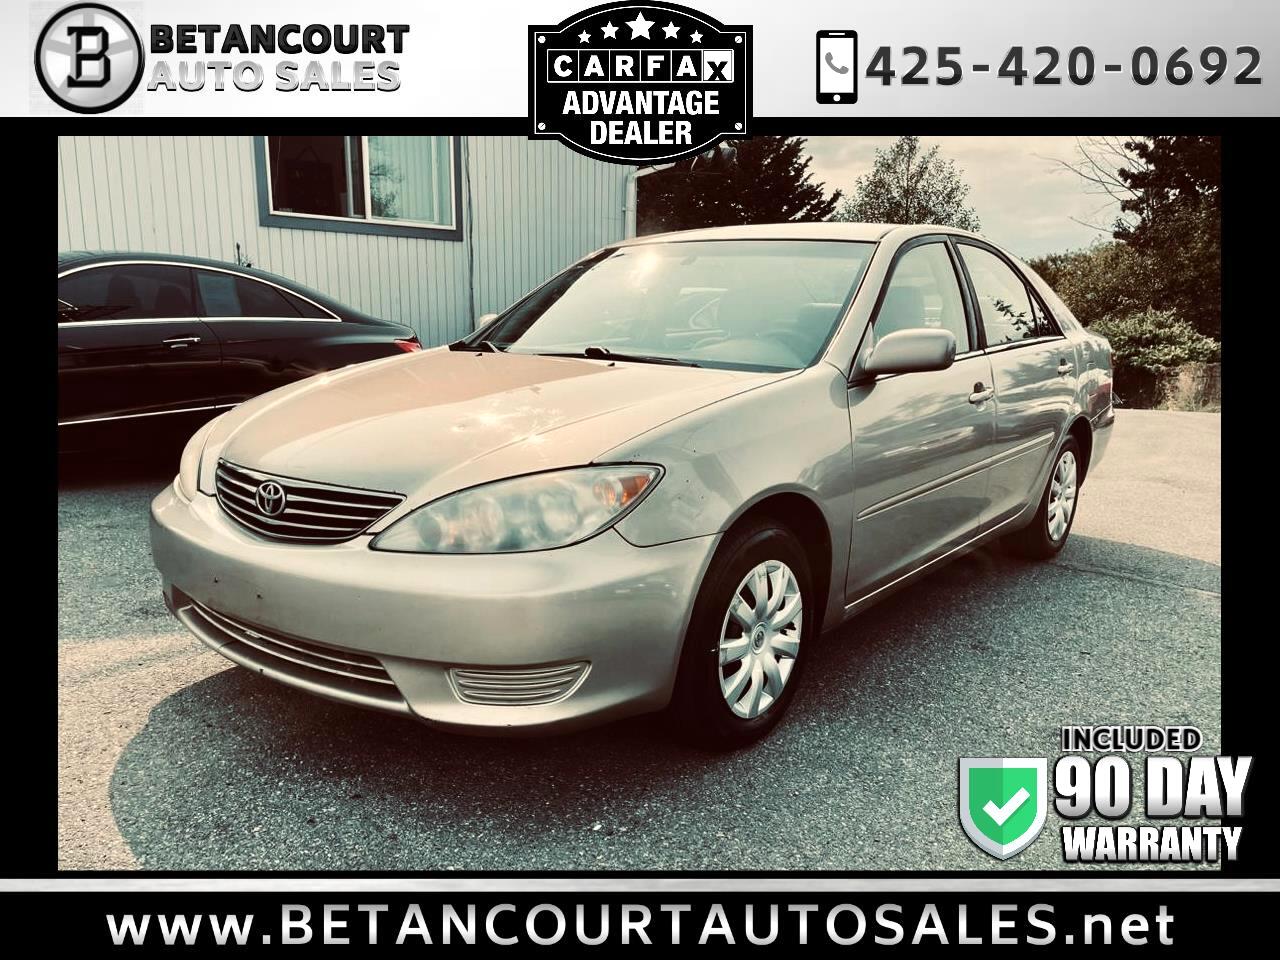 2005 Toyota Camry 4dr Sdn XLE Auto (Natl)